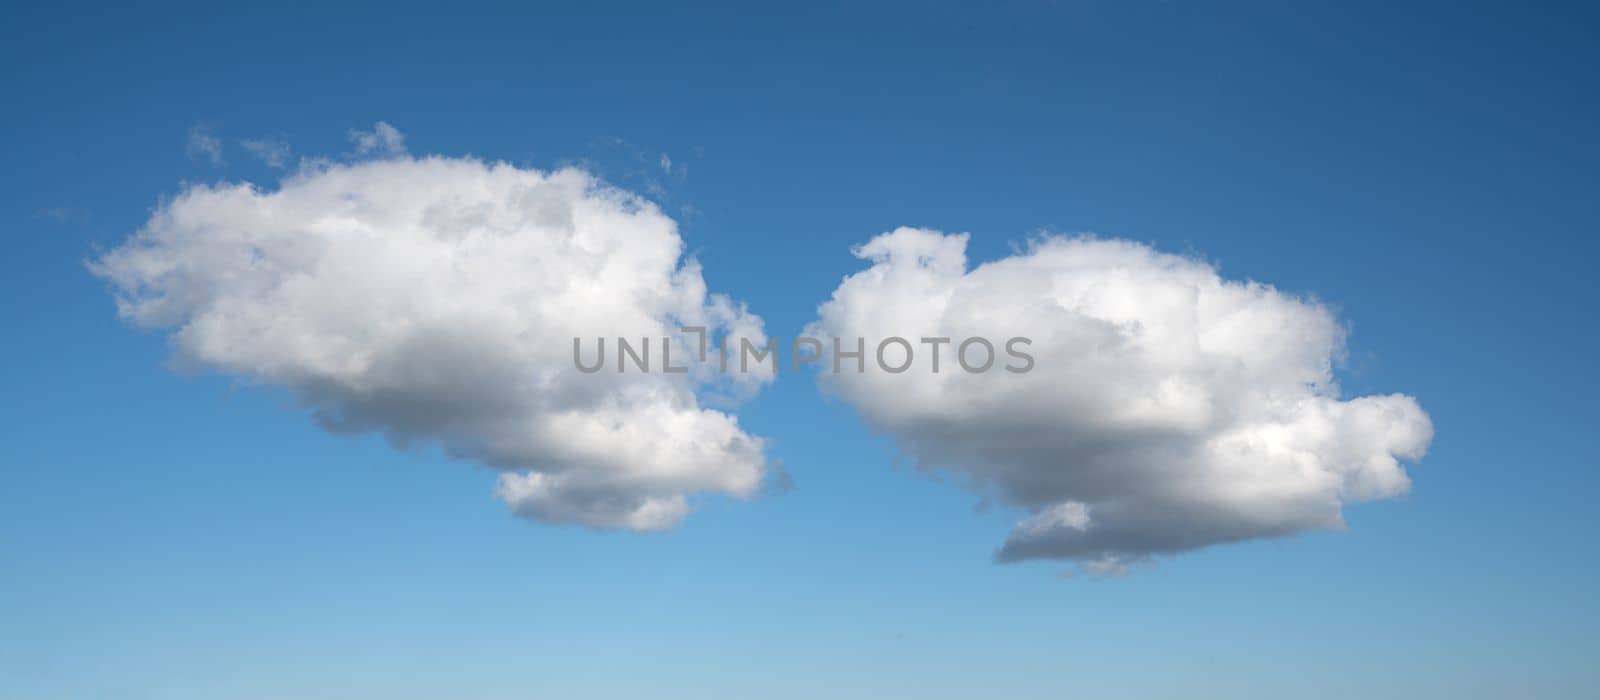 View to sky with cumulus clouds